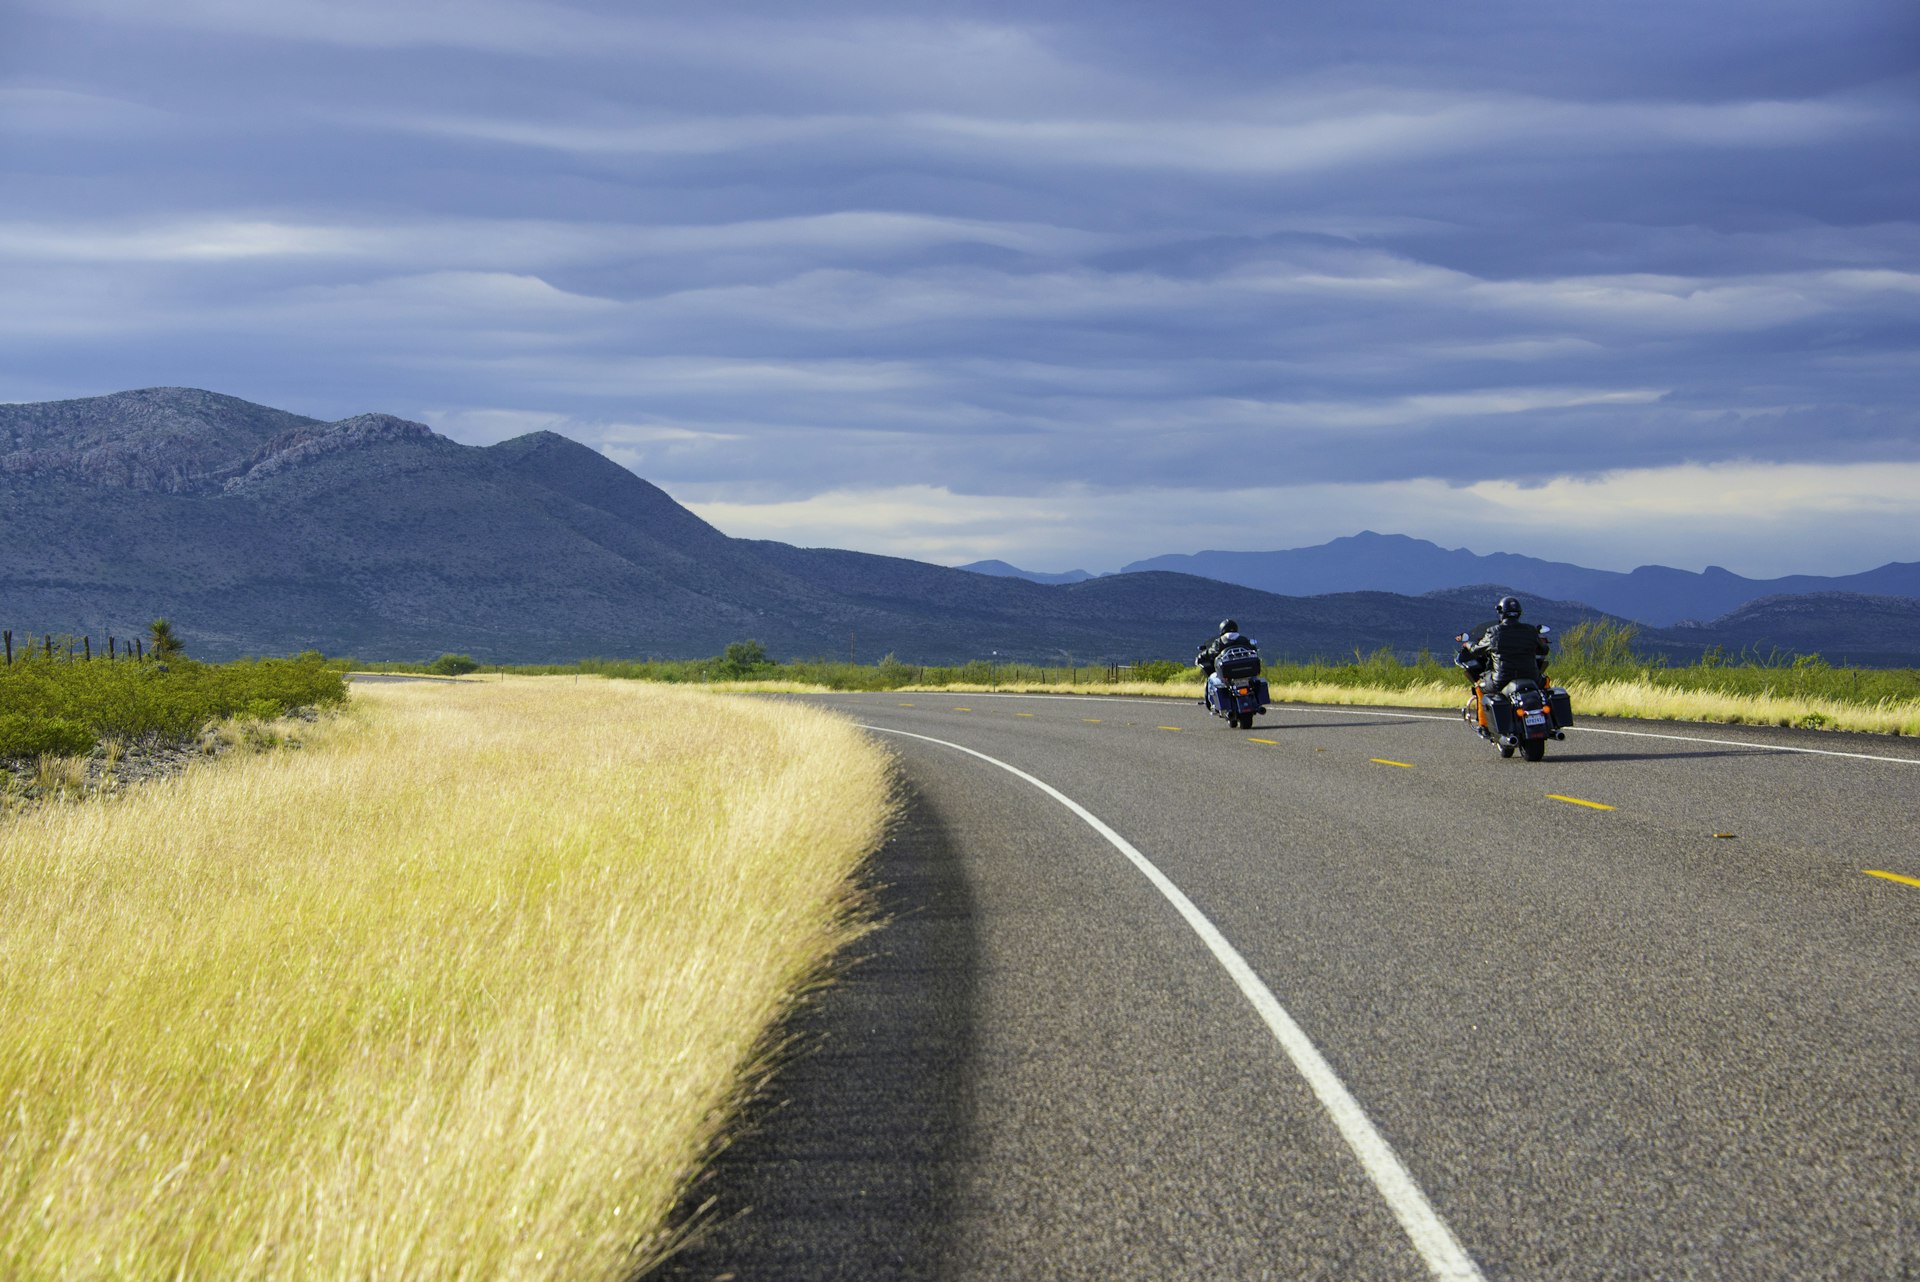 Two motorcyclists drive around a curving road in Big Bend National Park, Texas. In the distance, mountains are visible.